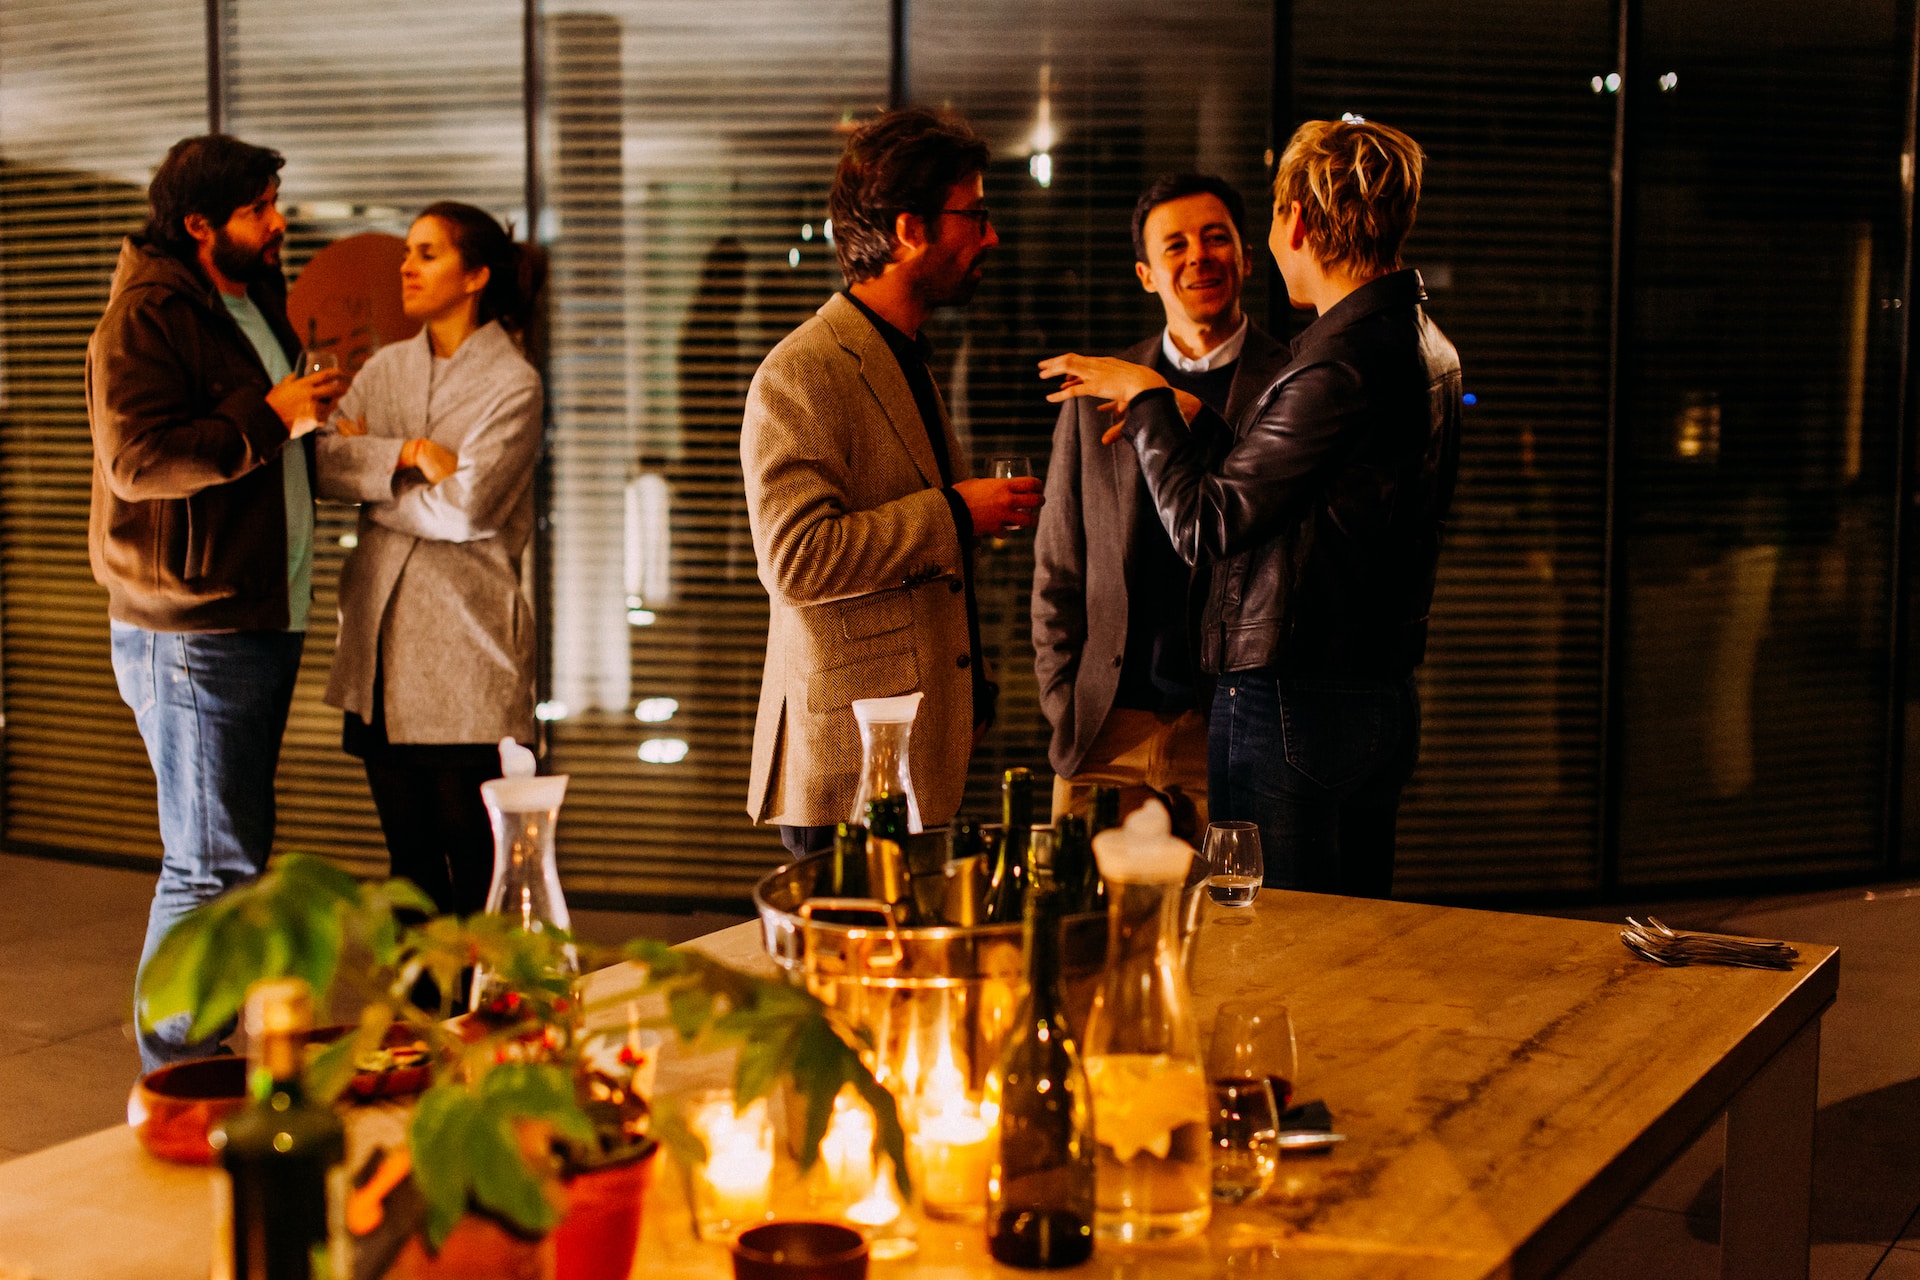 How to Make Your Corporate Event Stand Out to Customers